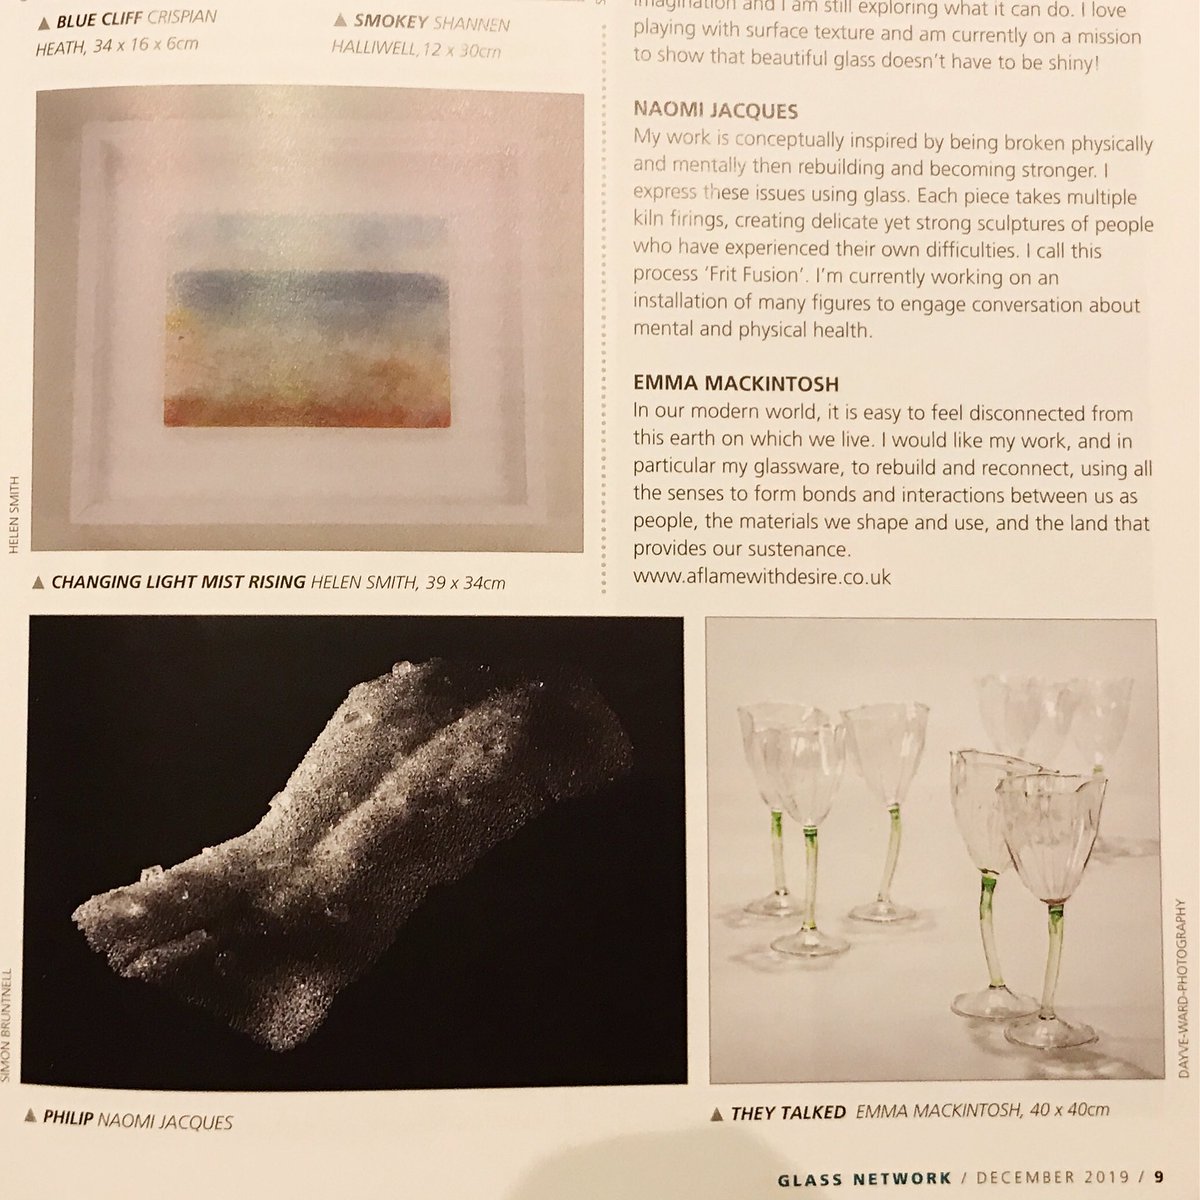 Thanks for the mention of my work  @CGSUK in the latest issue of Glass Network.

#glassart #art #glass #sculpture #form #unique #intertior #design #commissionsopen #bespoke #artist #maker #cgs #contemporaryglasssociety